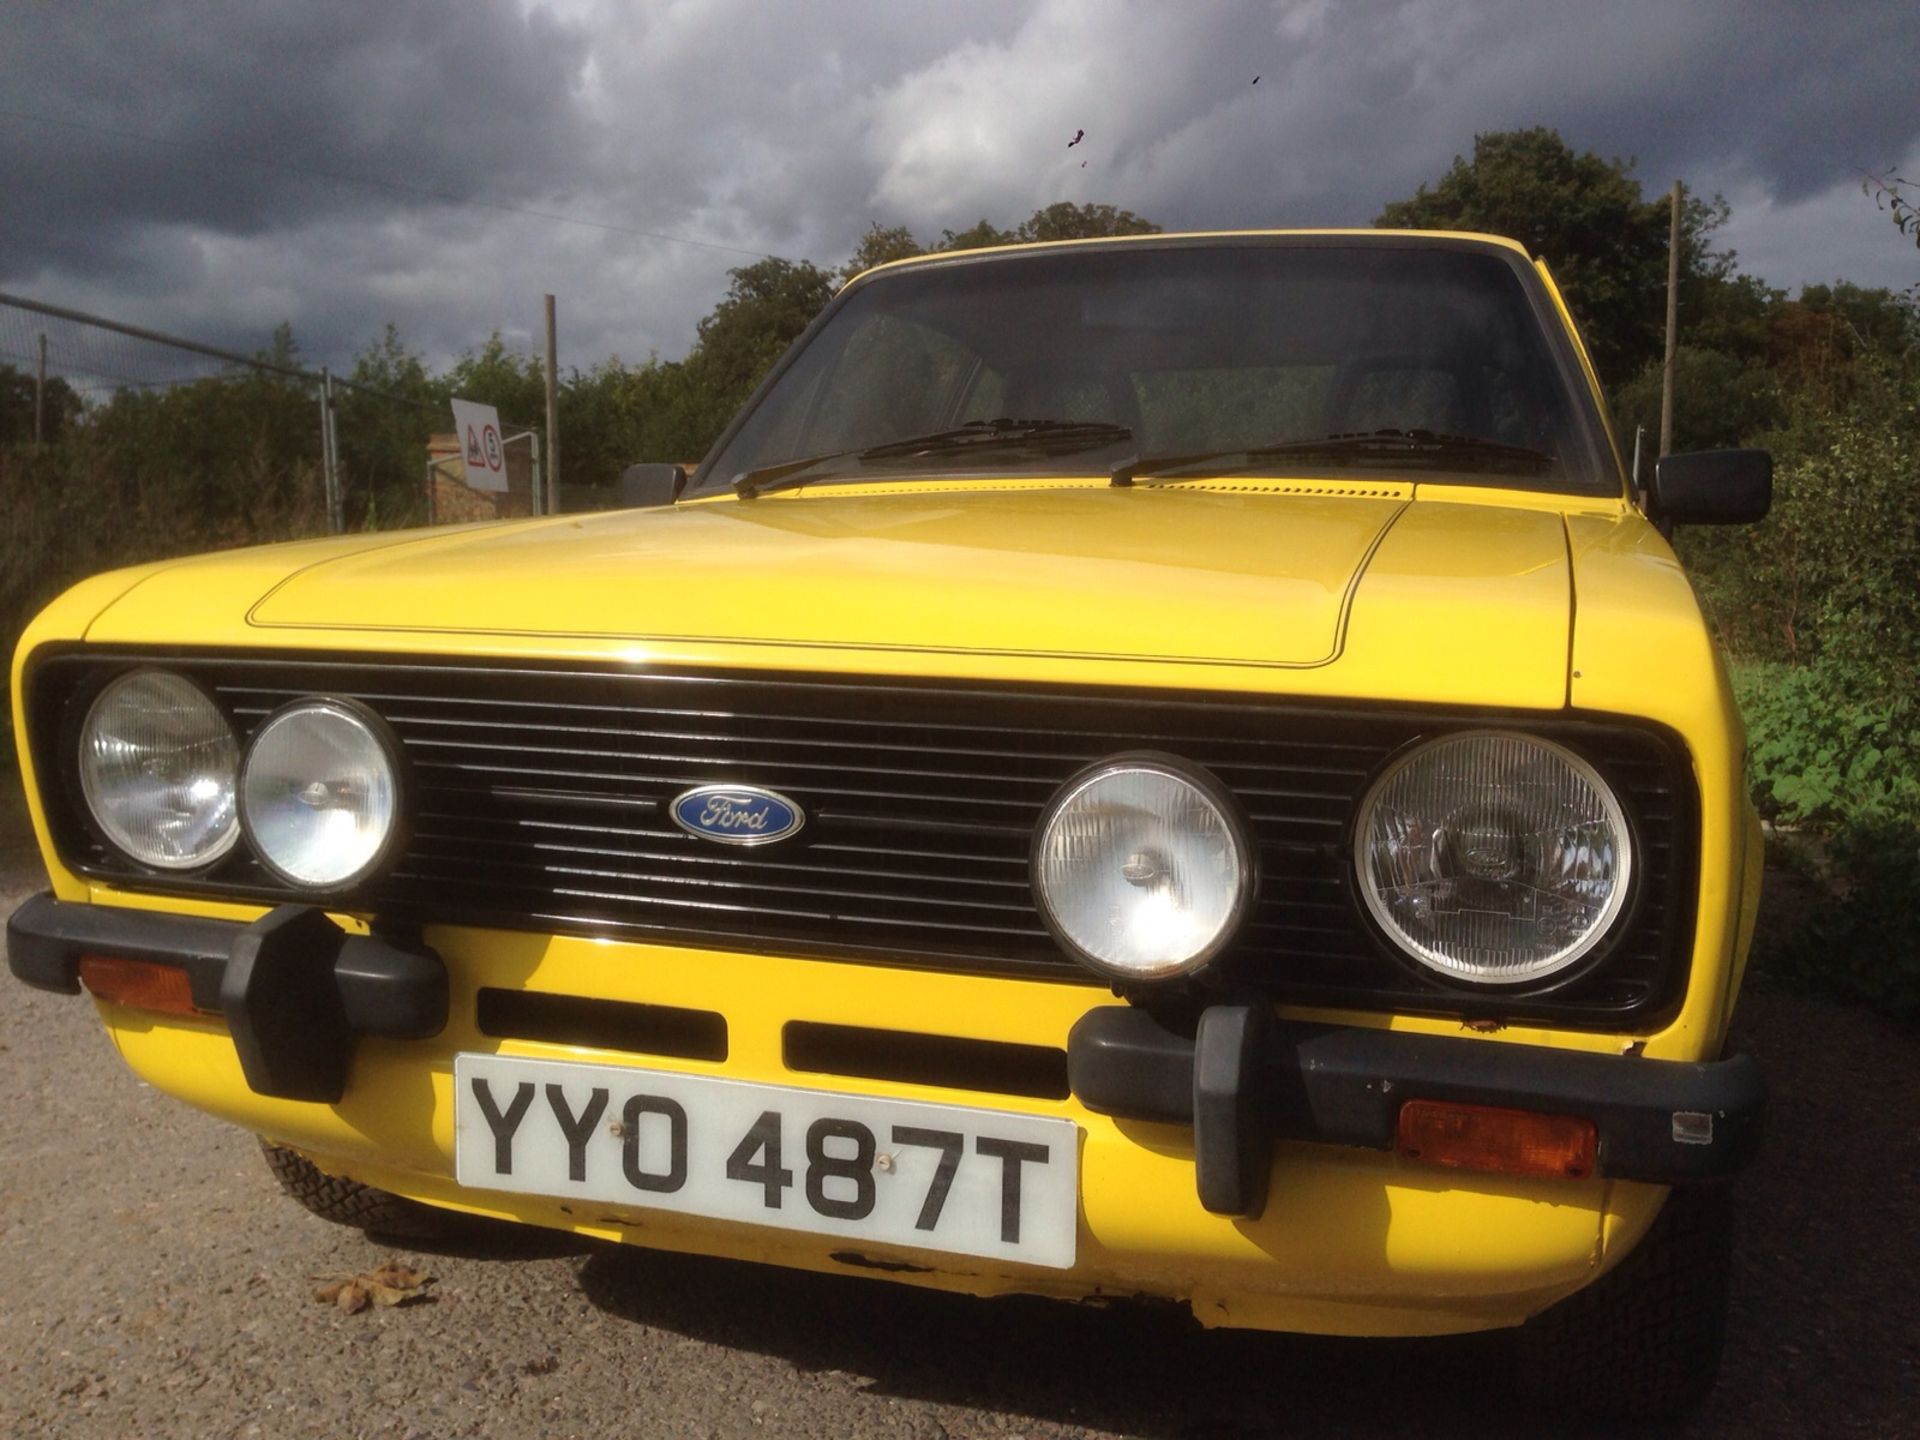 1979/T Ford Escort mk2 1600 Sport - in Signal yellow -  UK car  (545 miles) since rebuild - Image 9 of 54